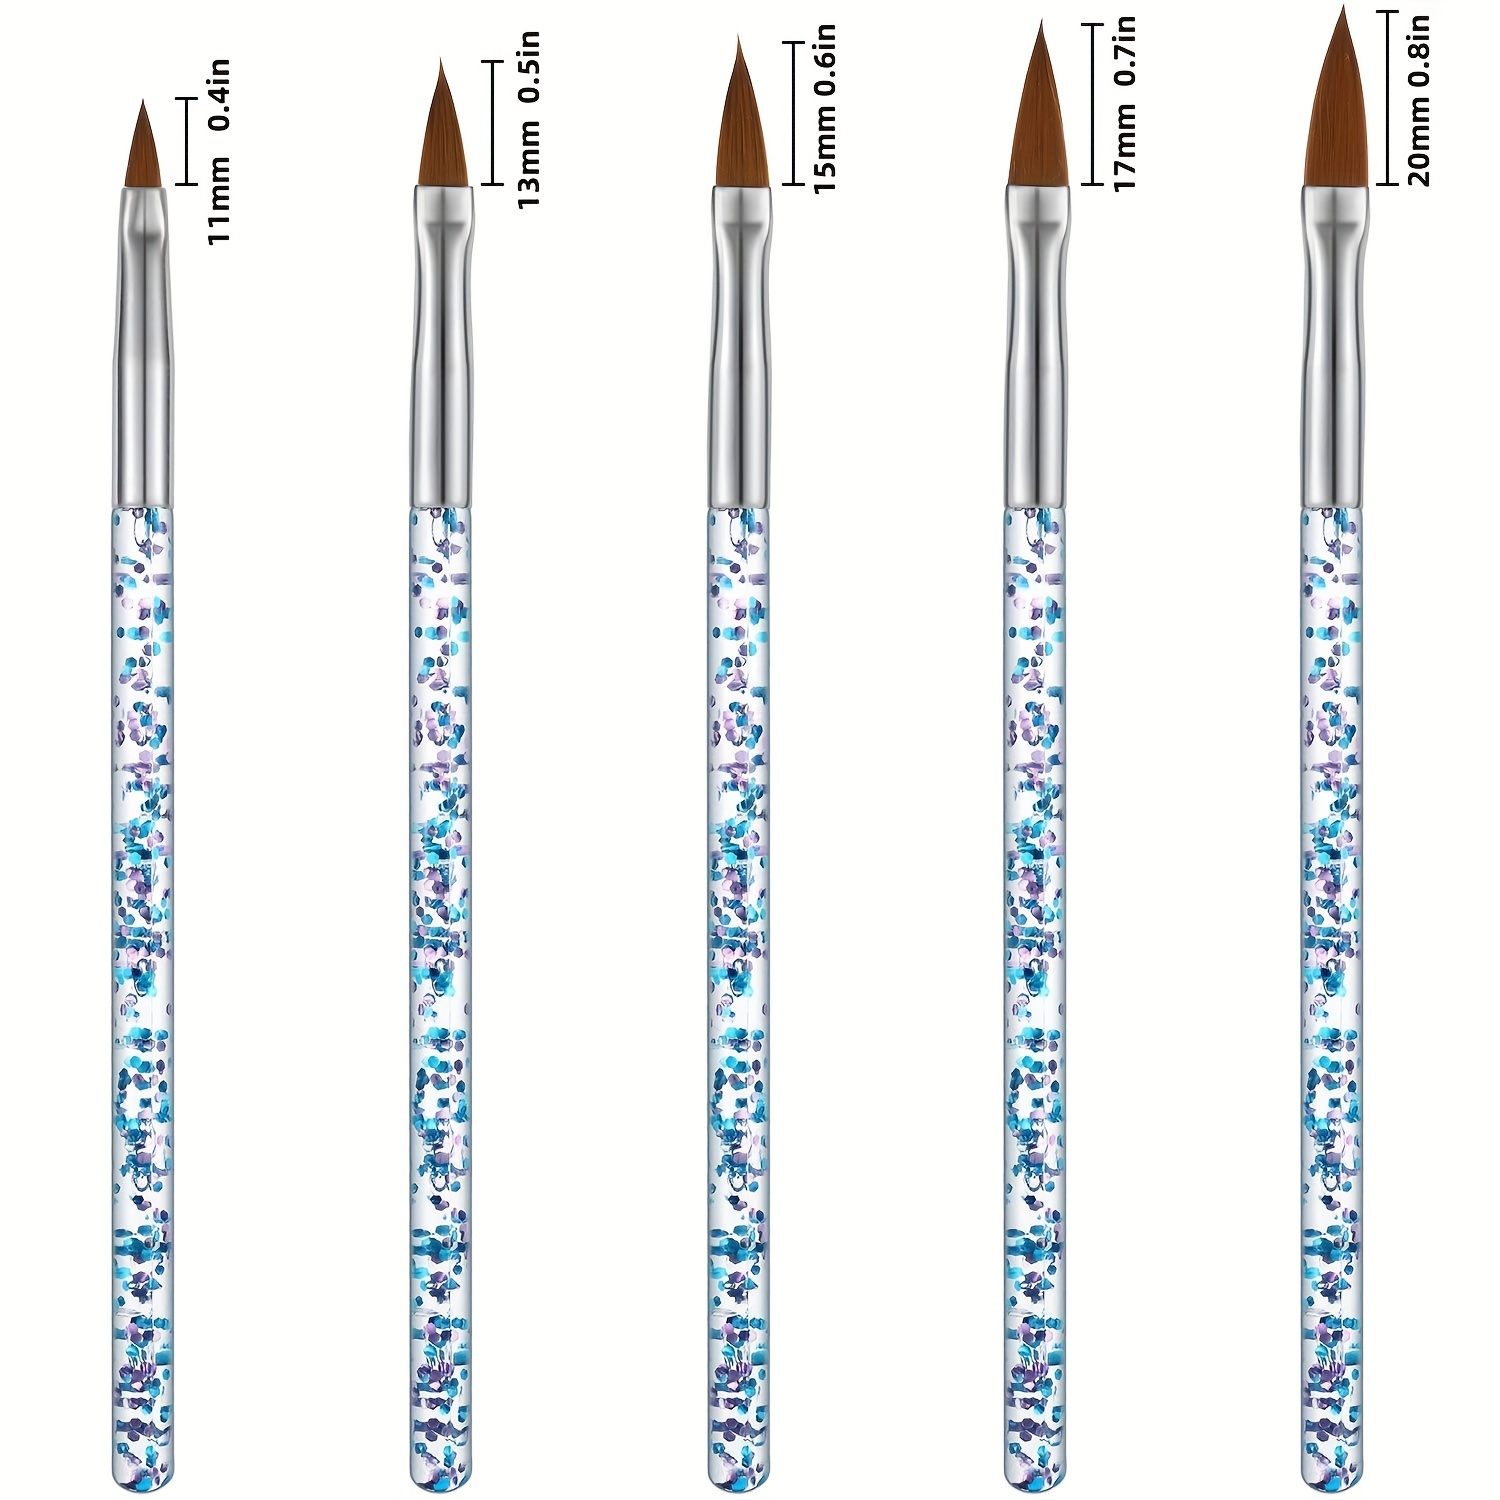 Nail Paint Brush Set With Practical Tools: Brushes, Dots, Pens, And Gel  Polish Brusles For Painting And Drawing From Extranordinary, $11.7